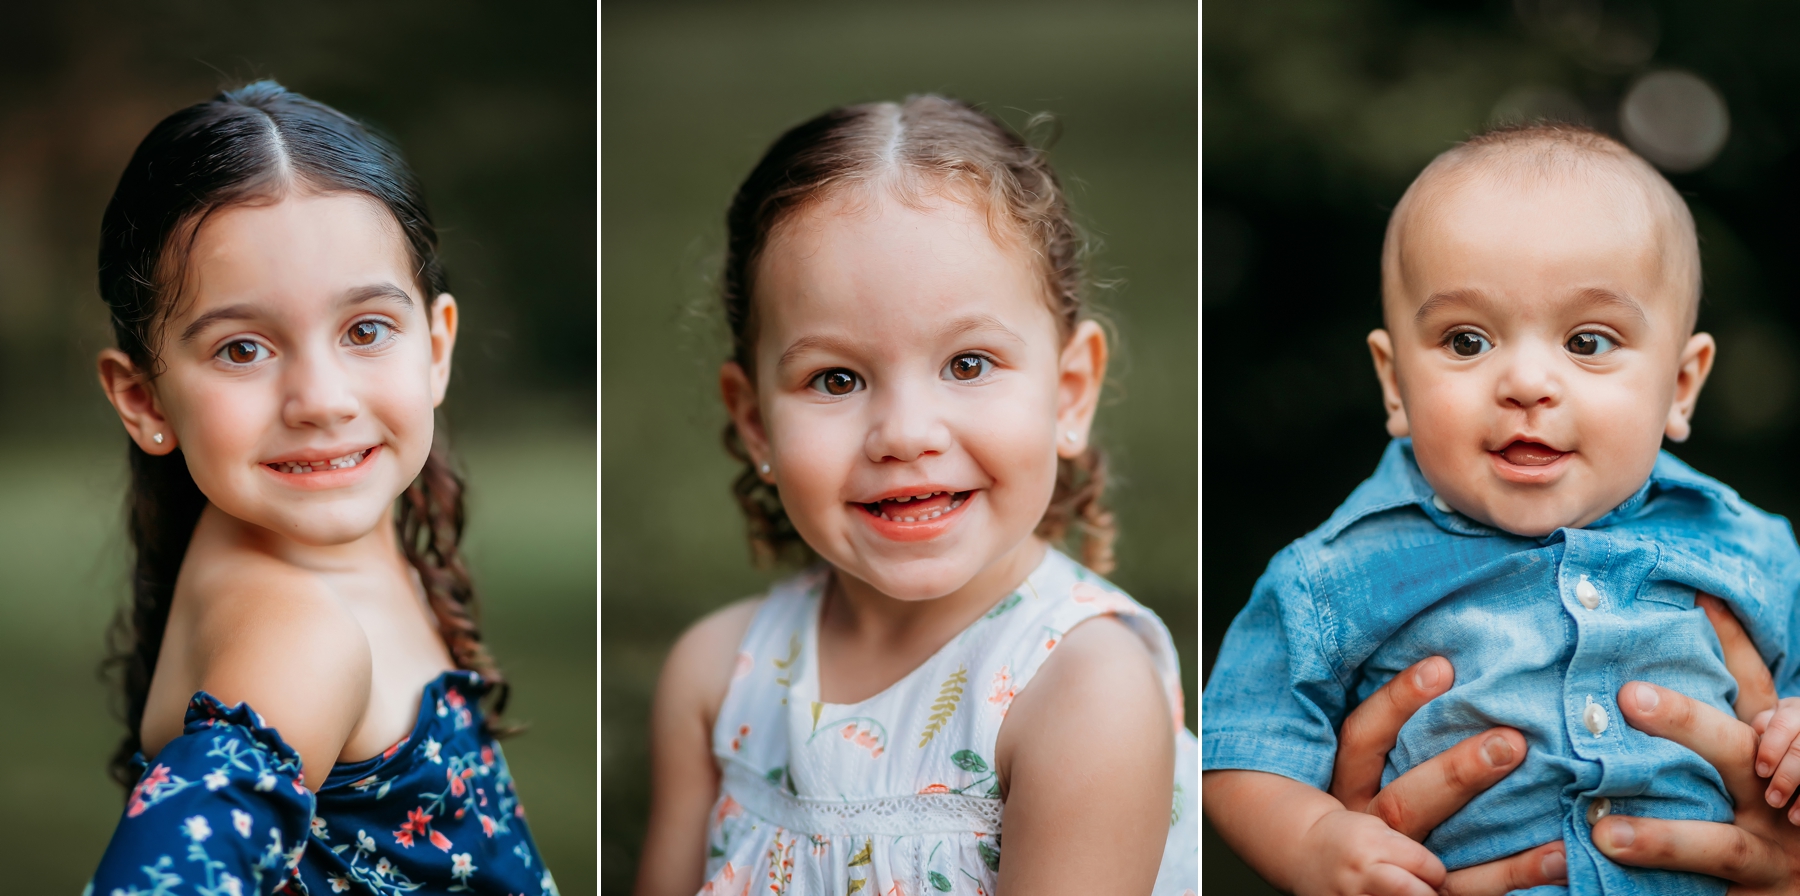 Family Photography Session Warrensburg Brittany Jewell Photography